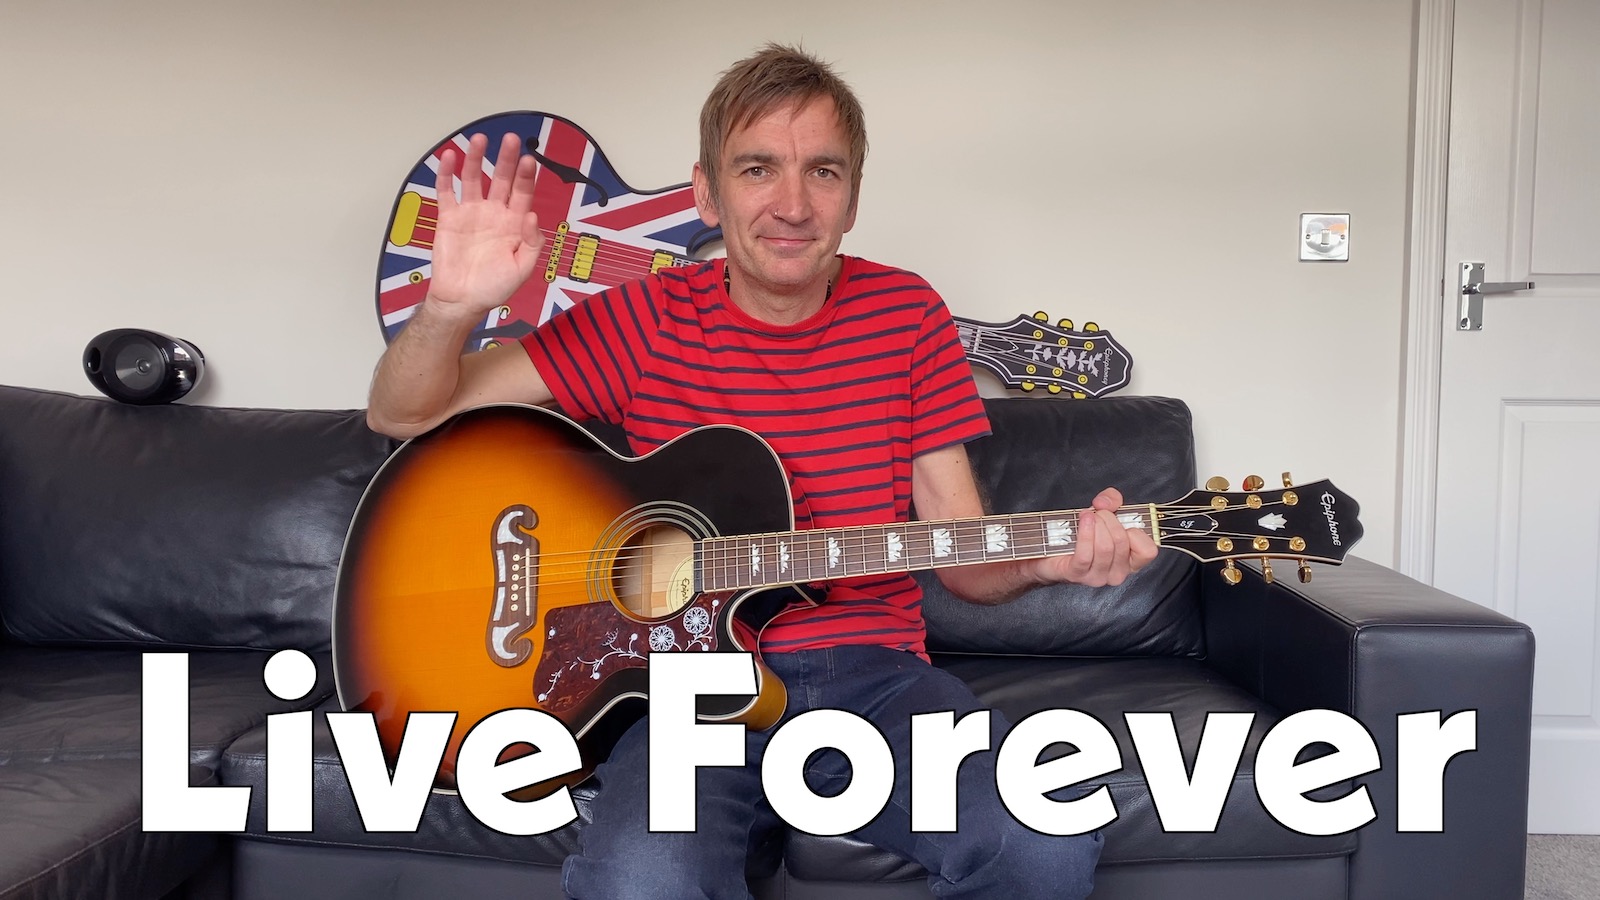 Live Forever (Oasis) acoustic cover by Andrew Starkey